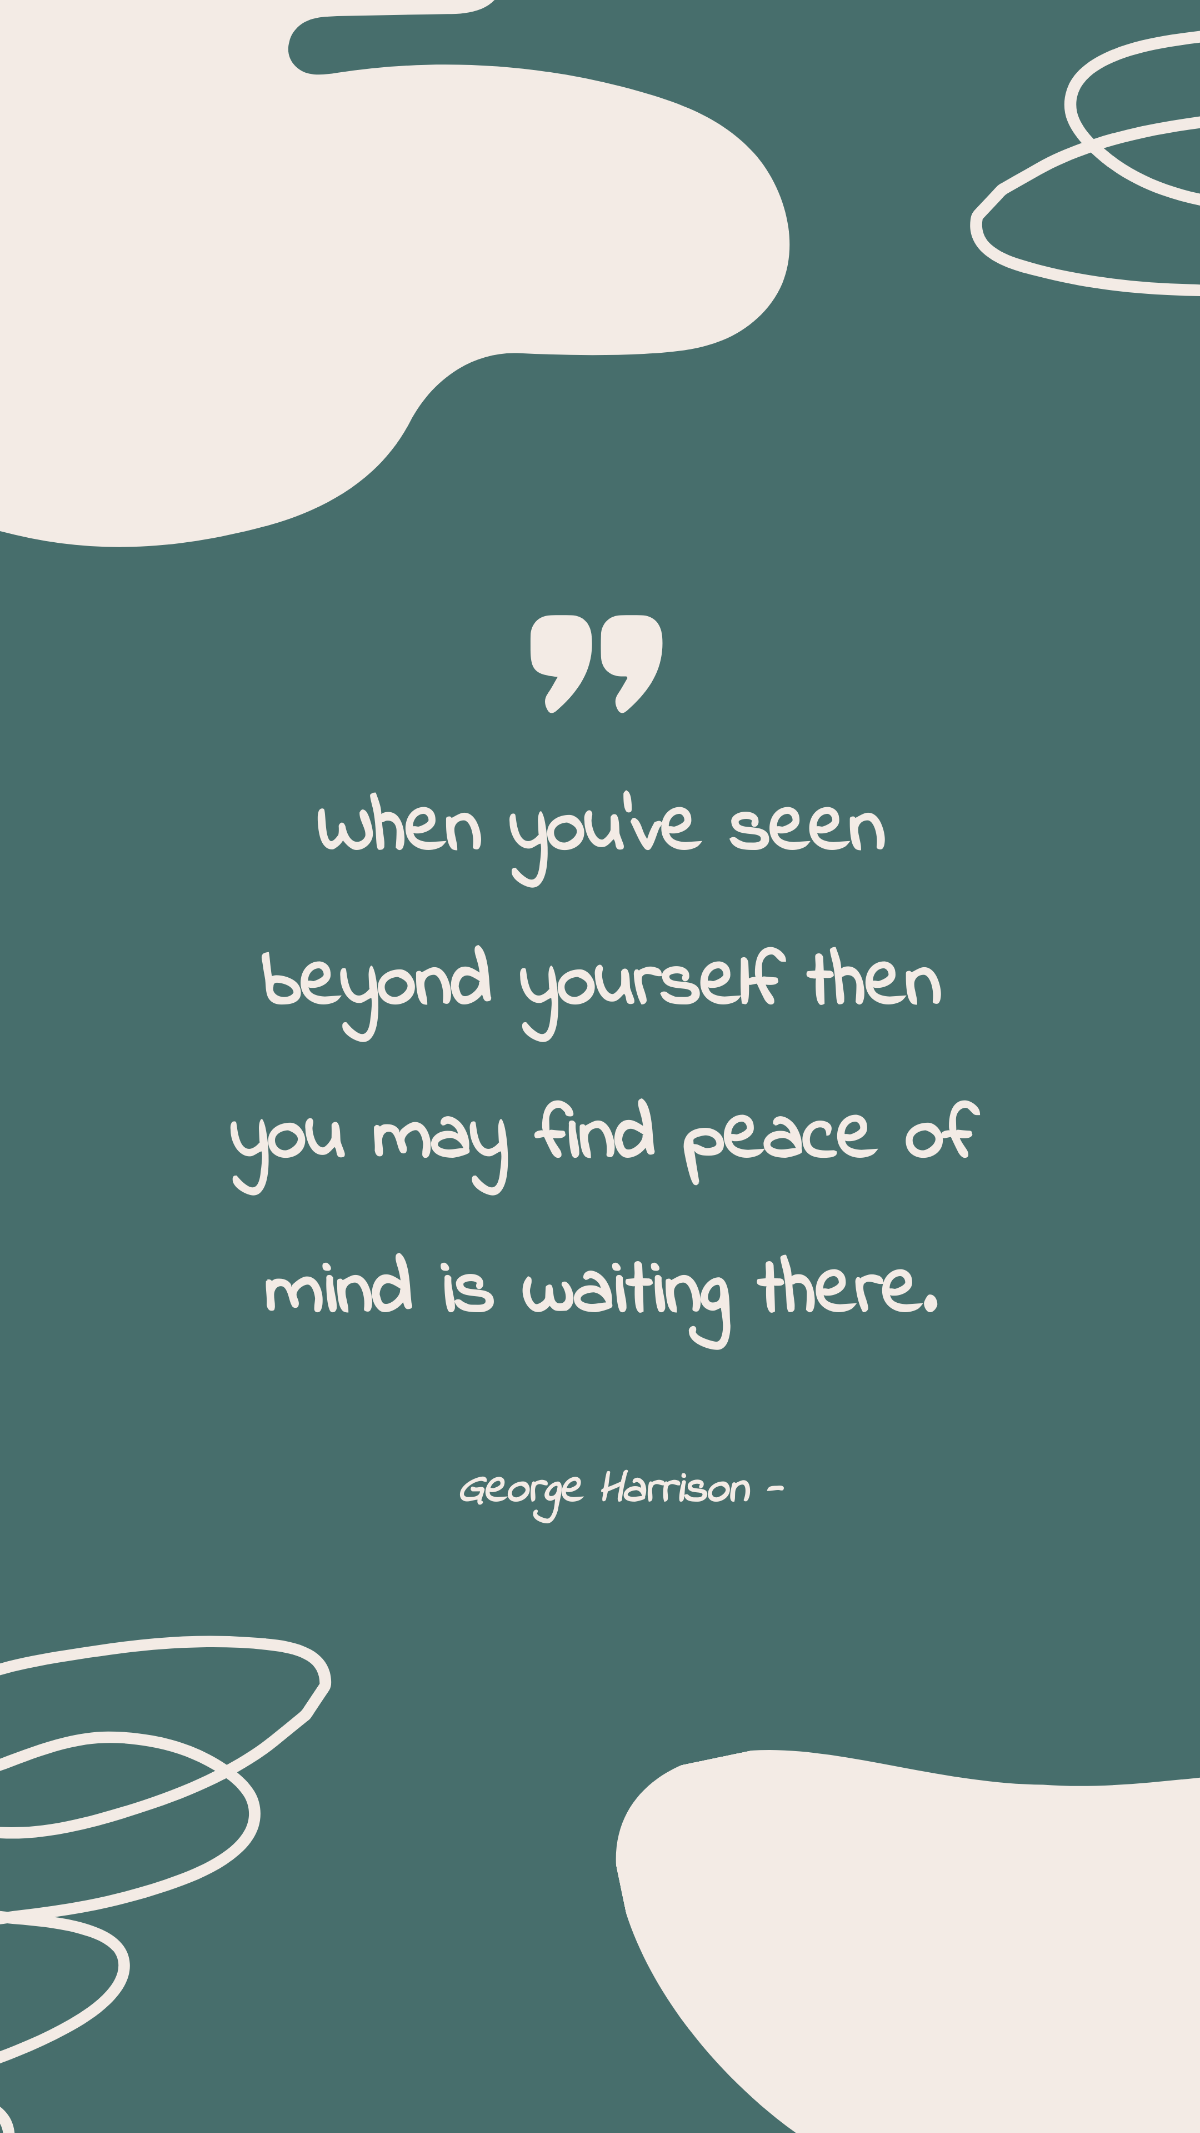 George Harrison - When you’ve seen beyond yourself then you may find peace of mind is waiting there. Template